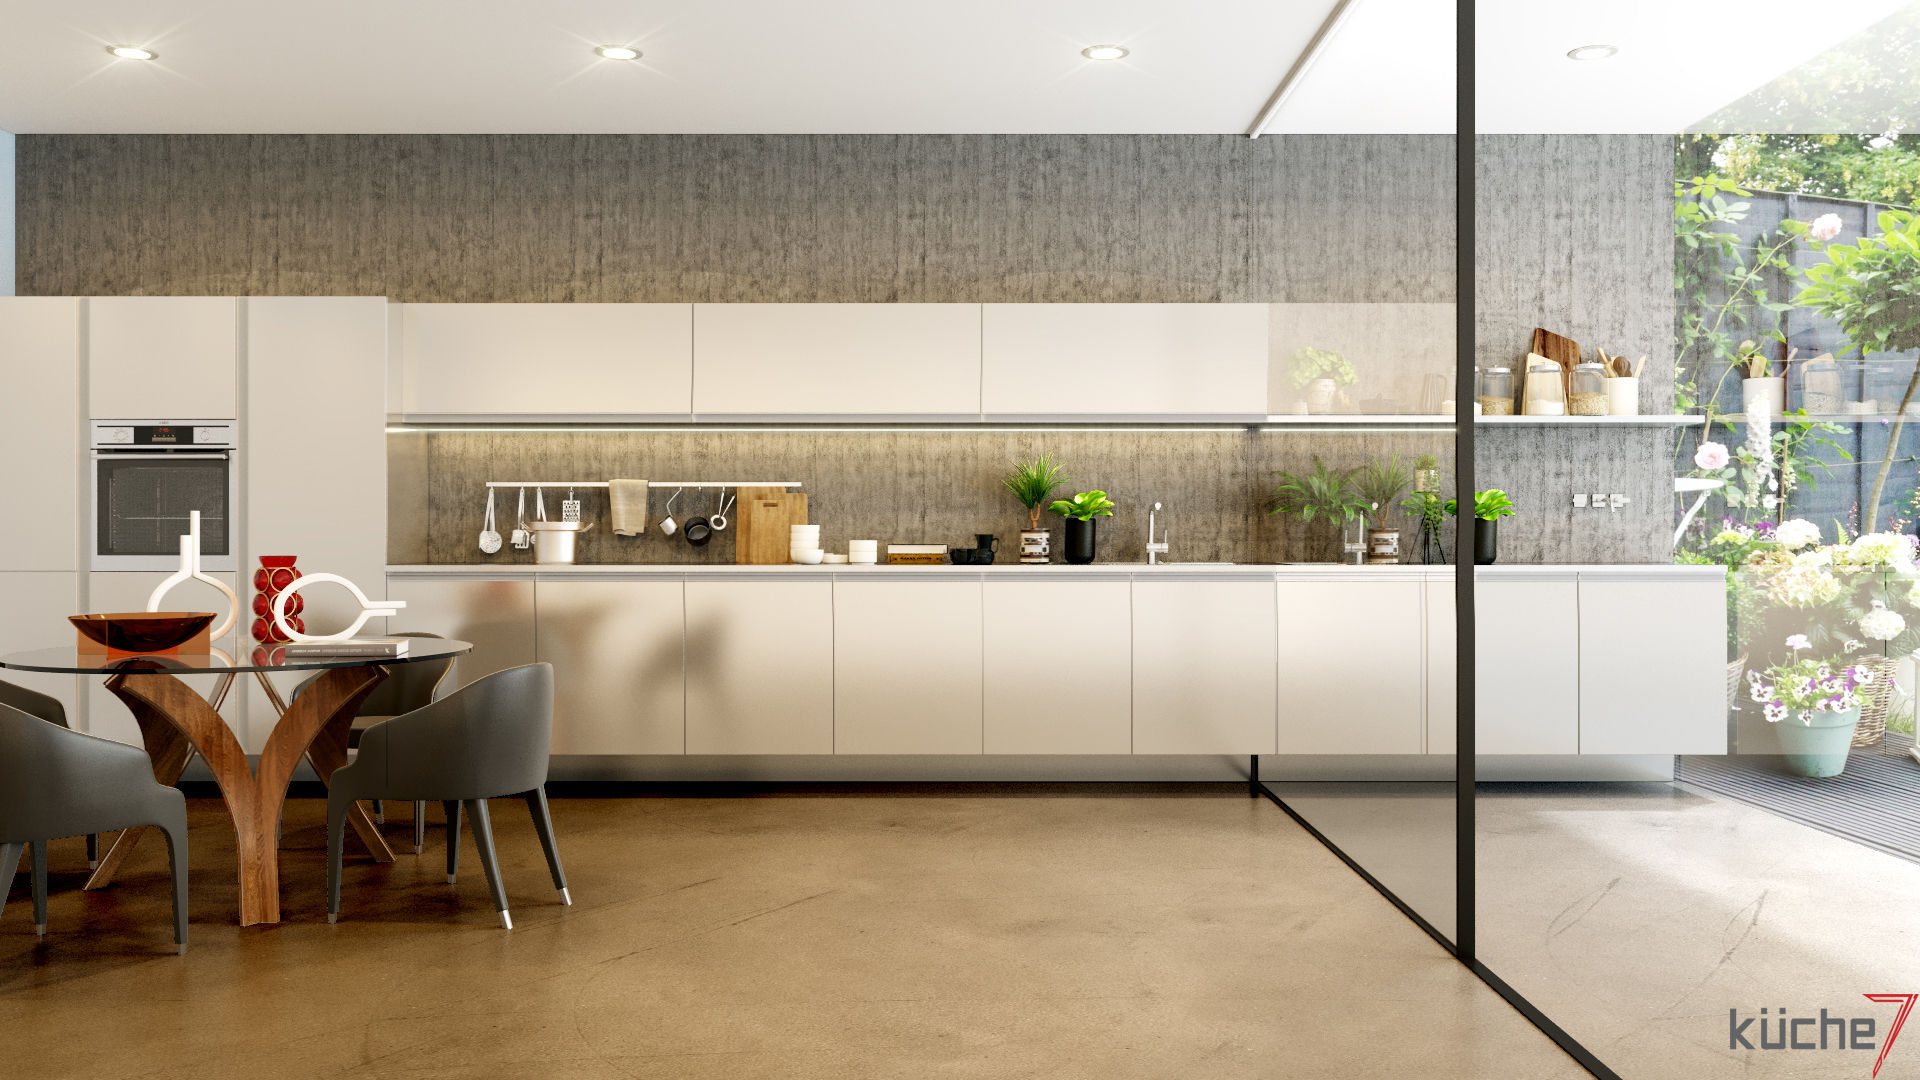 Luxury kitchens that outclasses all other kitchens you've seen, Küche7 Küche7 Kuchnia na wymiar